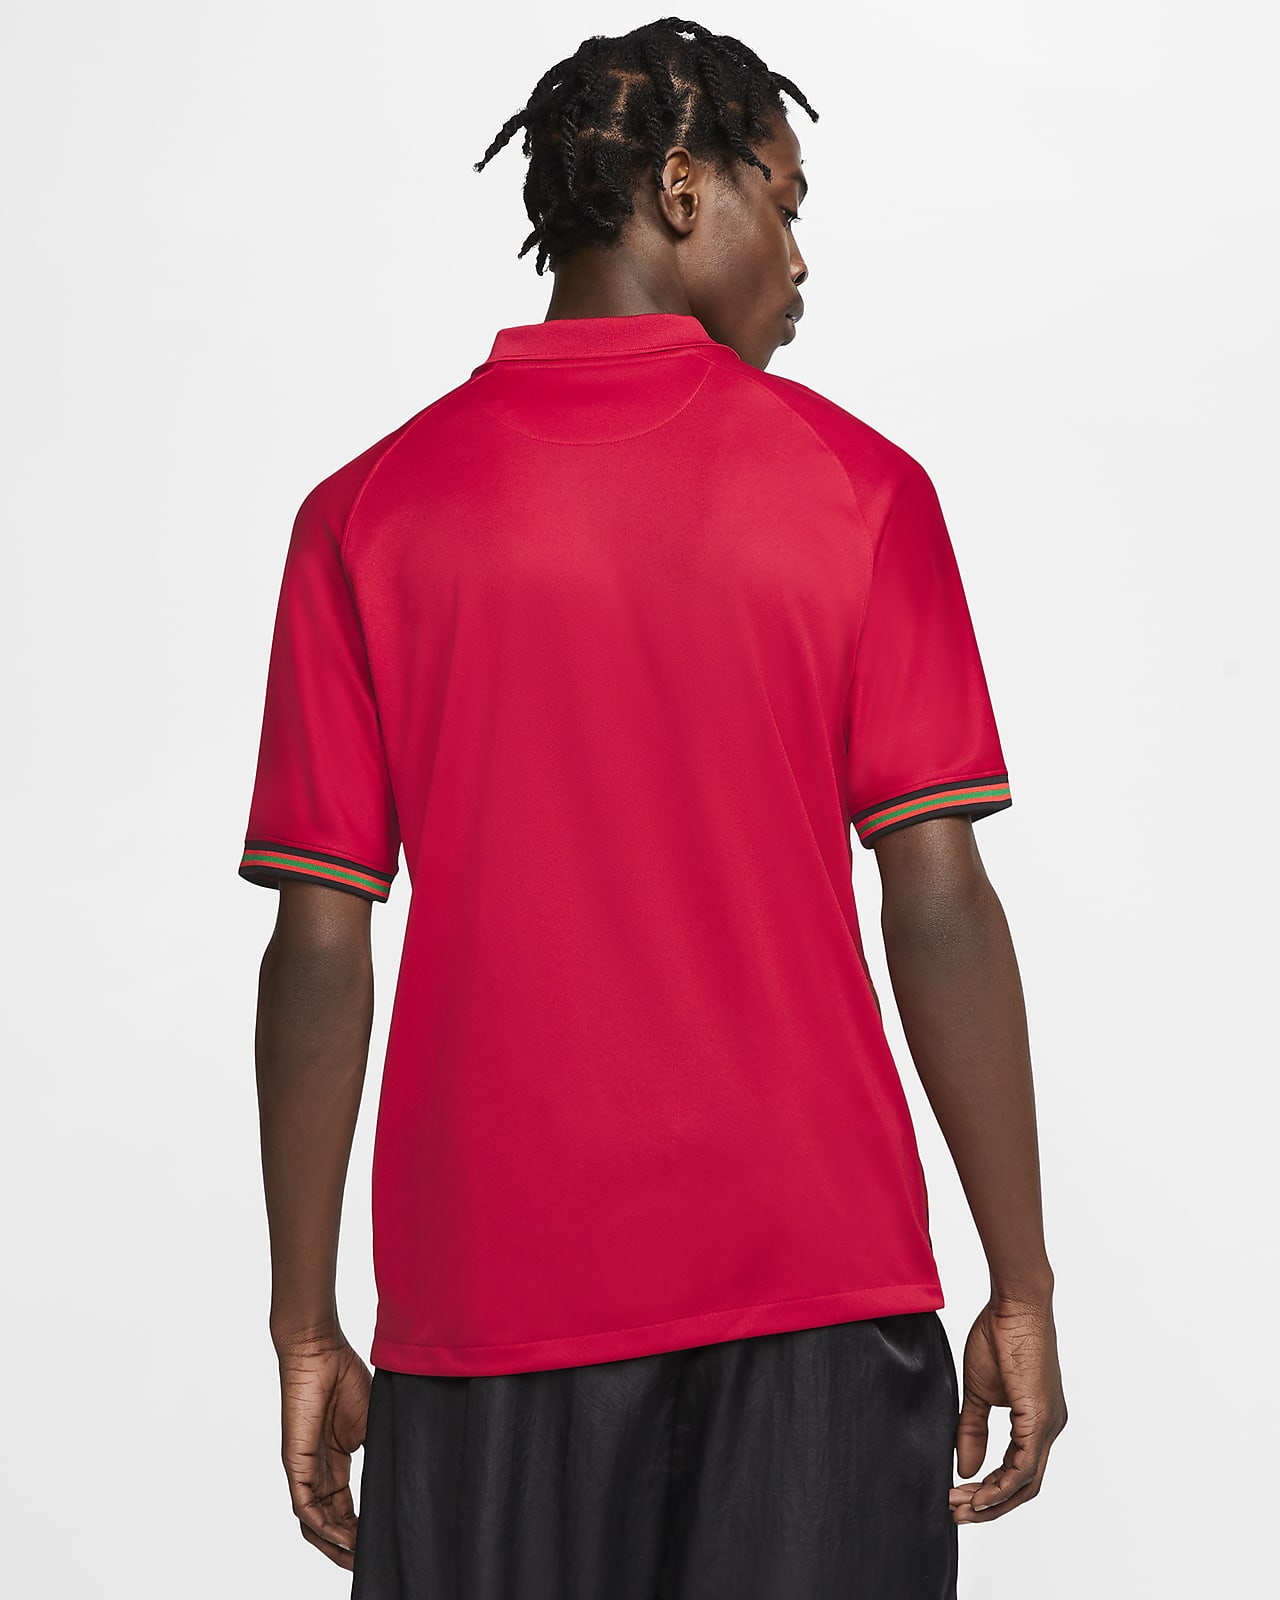 Nike Portugal 2020 Home Jersey